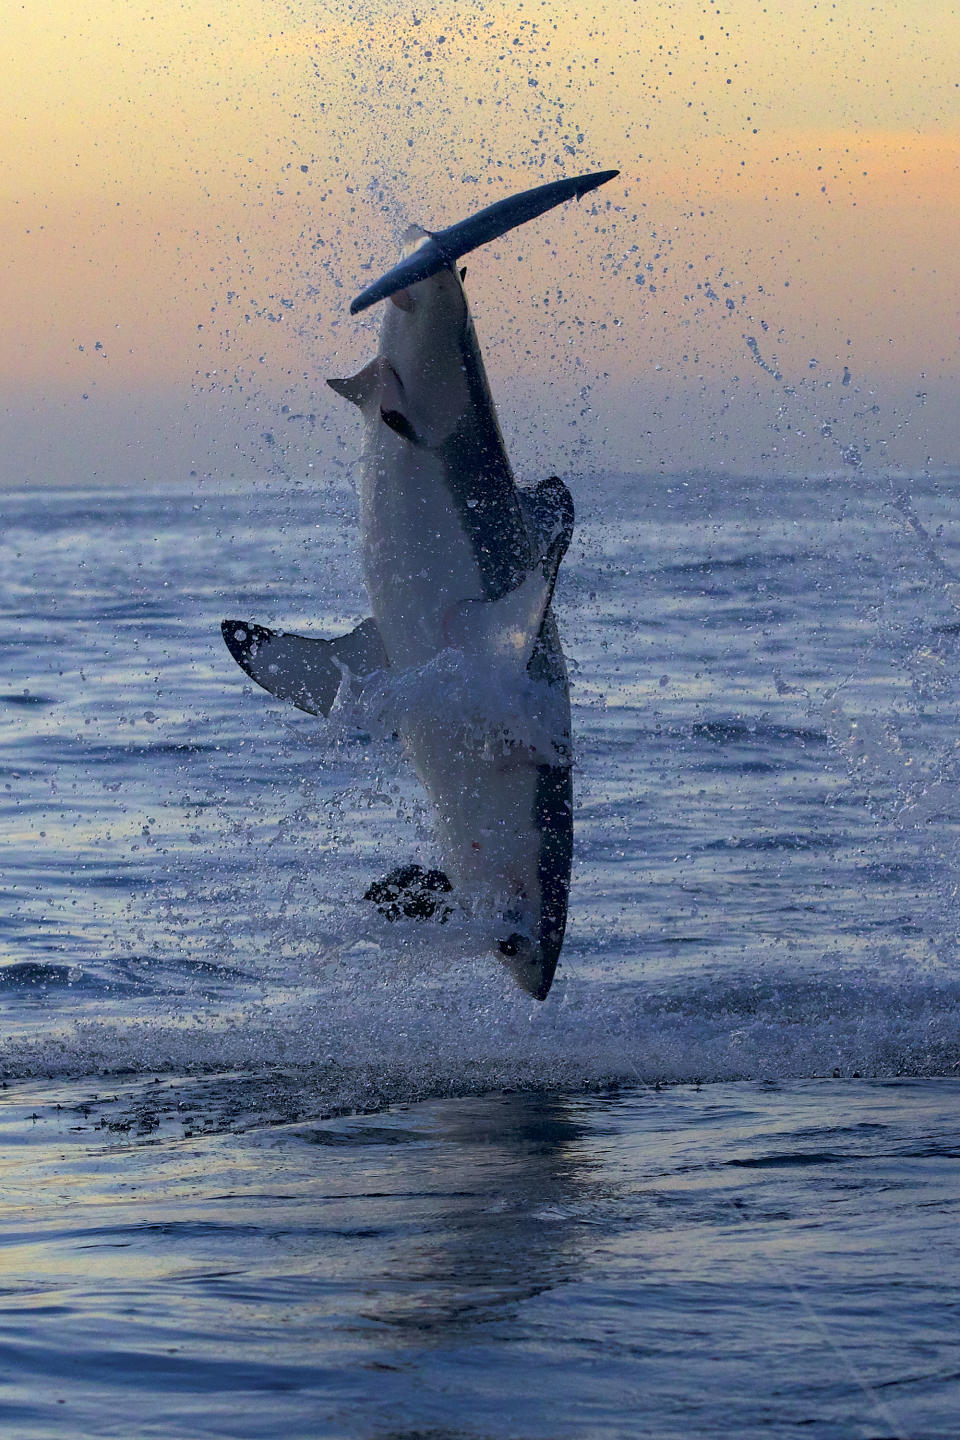 This image released by Warner Bros. Discovery shows a great white shark breaching. Shark Week, 25 hours of programming dedicated to all varieties of the apex predators, starts July 24 on the Discovery Channel and streaming on discovery+. (Warner Bros. Discovery via AP)